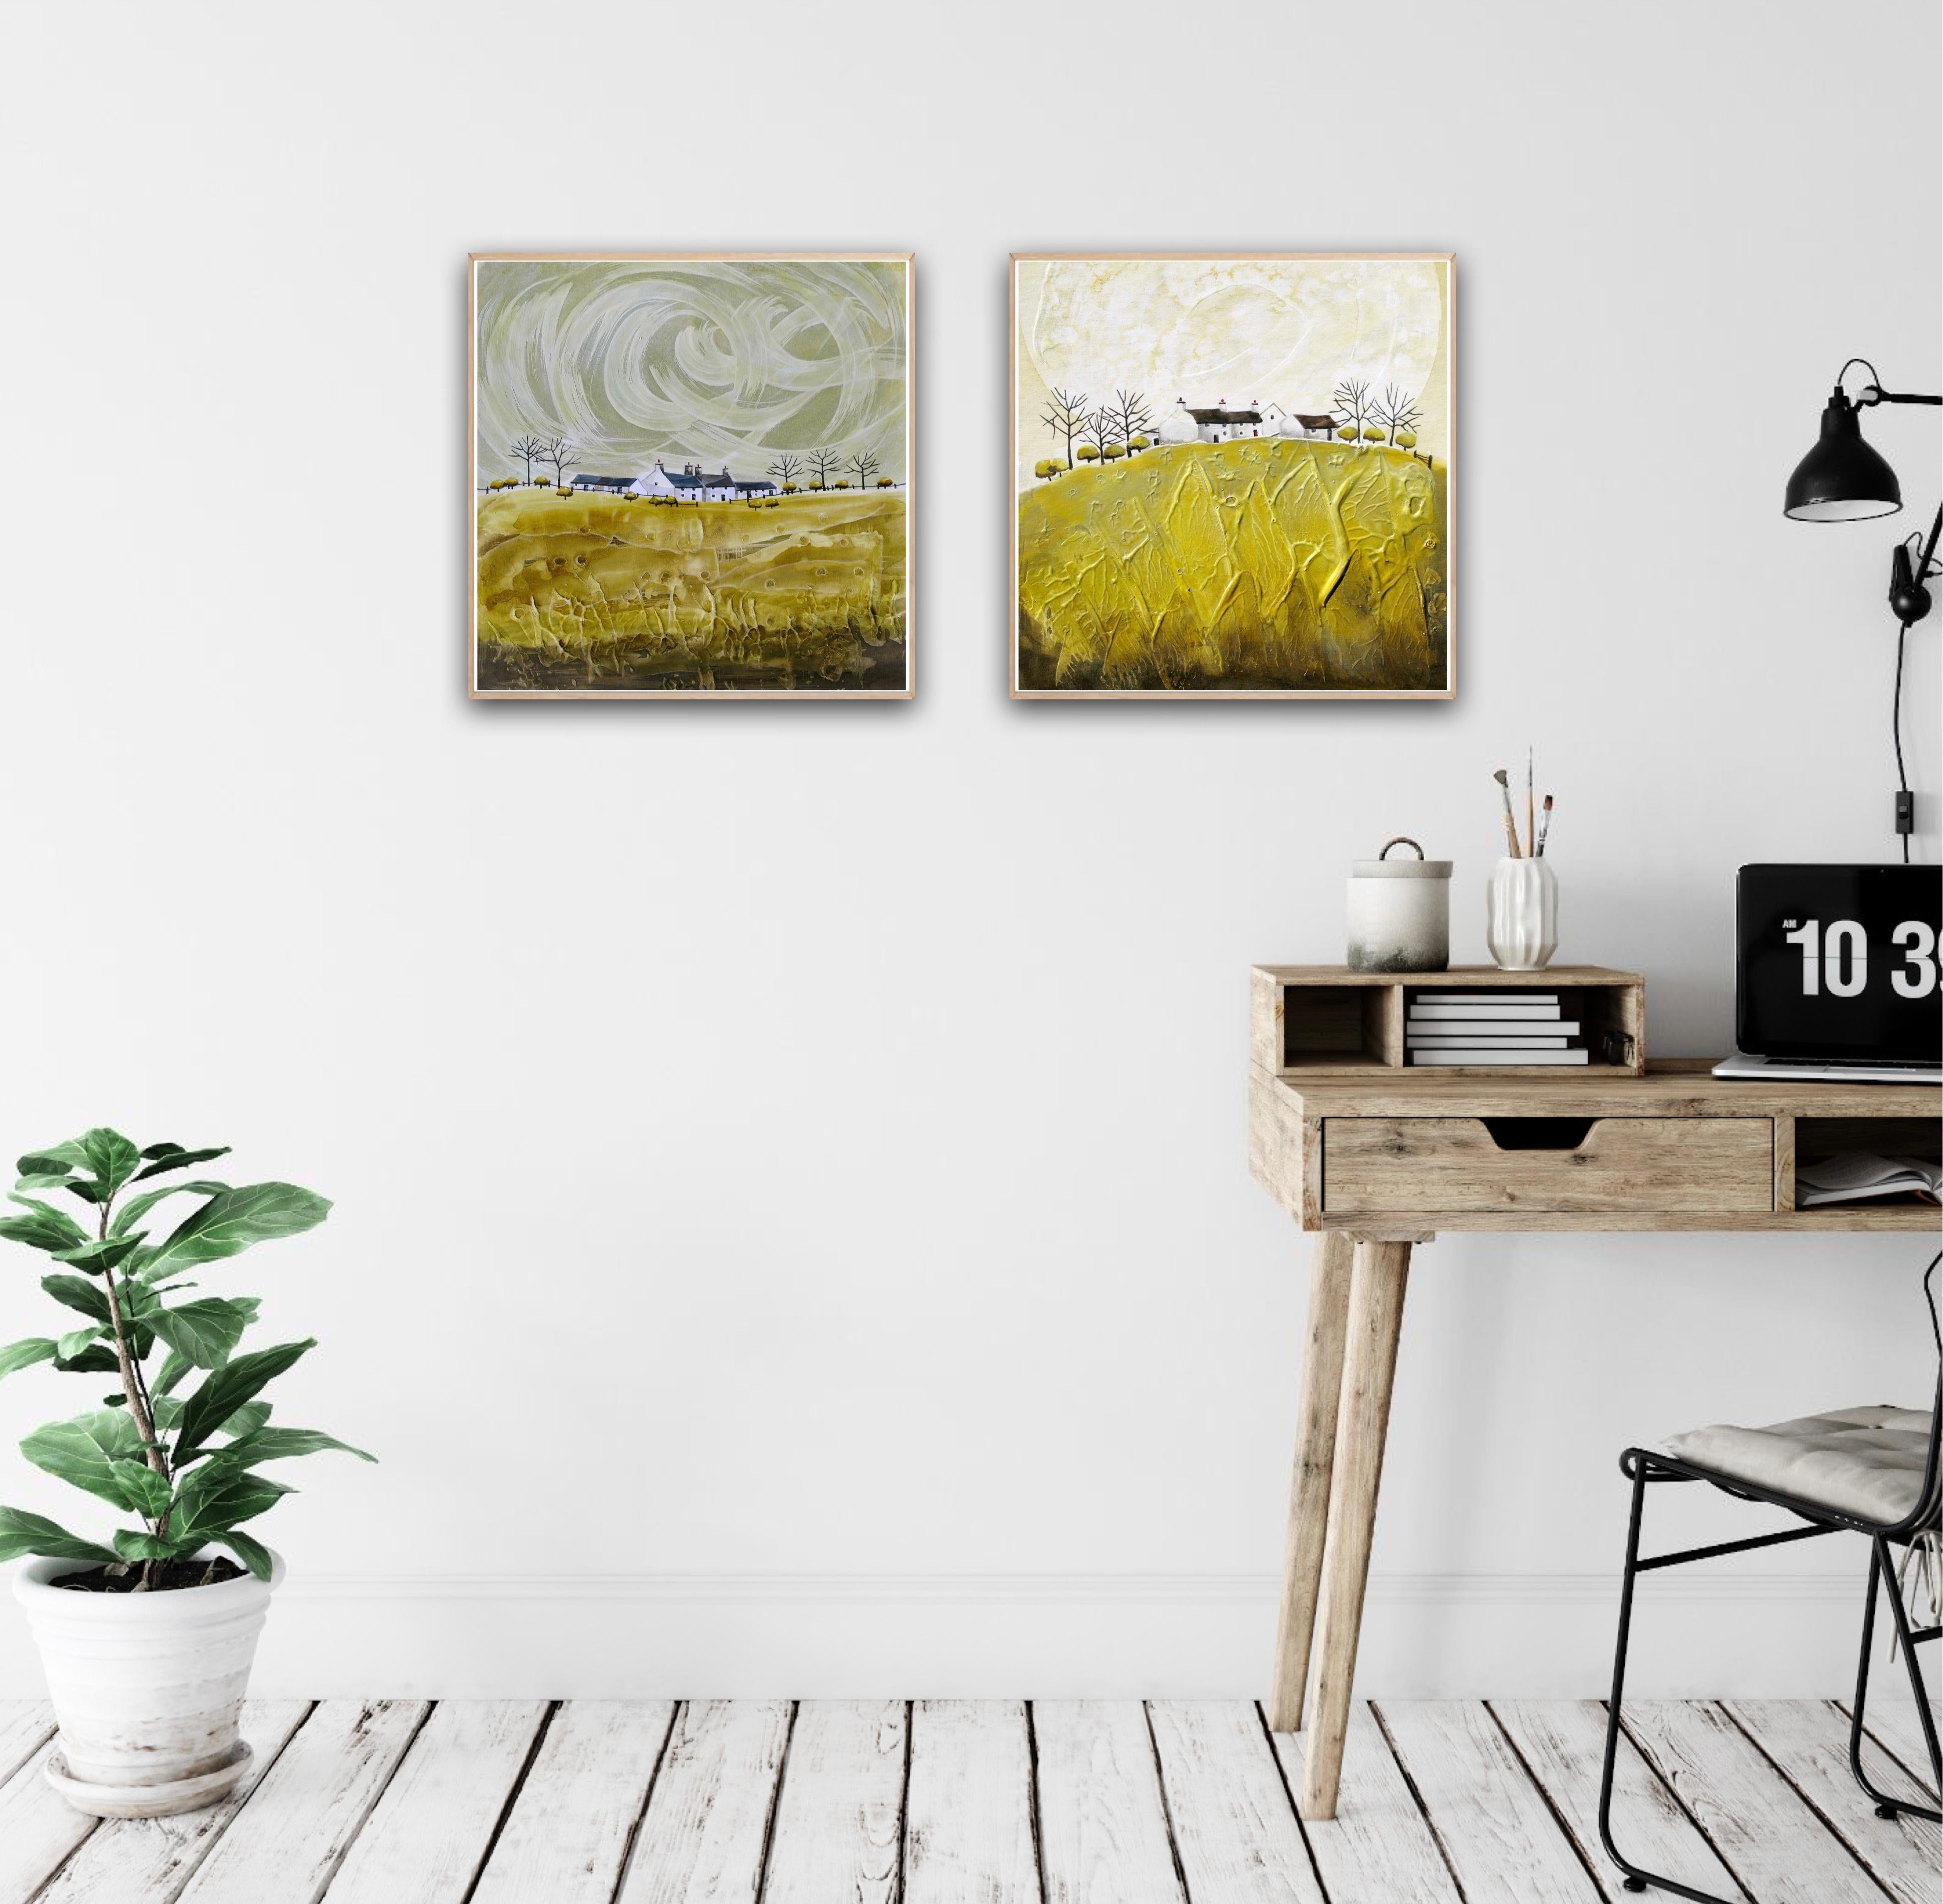 Crater Valley Farm and Crater Cottages 3 diptych
Overall size cm : H100 x W100

Crater Valley Farm is a limited edition print by Anya Simmons, inspired by her travels across the United Kingdom.
This Giclée limited edition print is created using